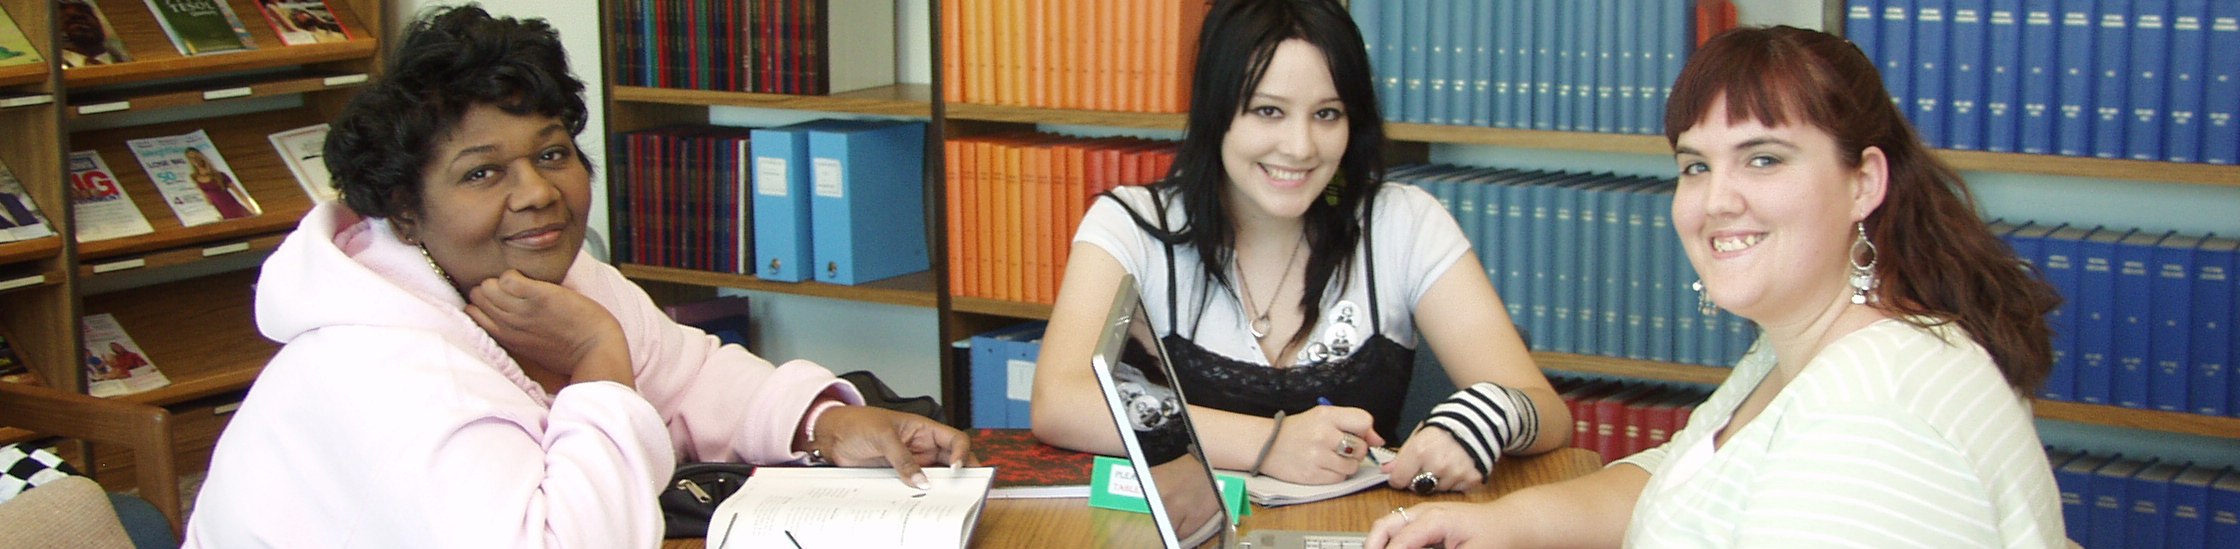 Students studying in the libary.